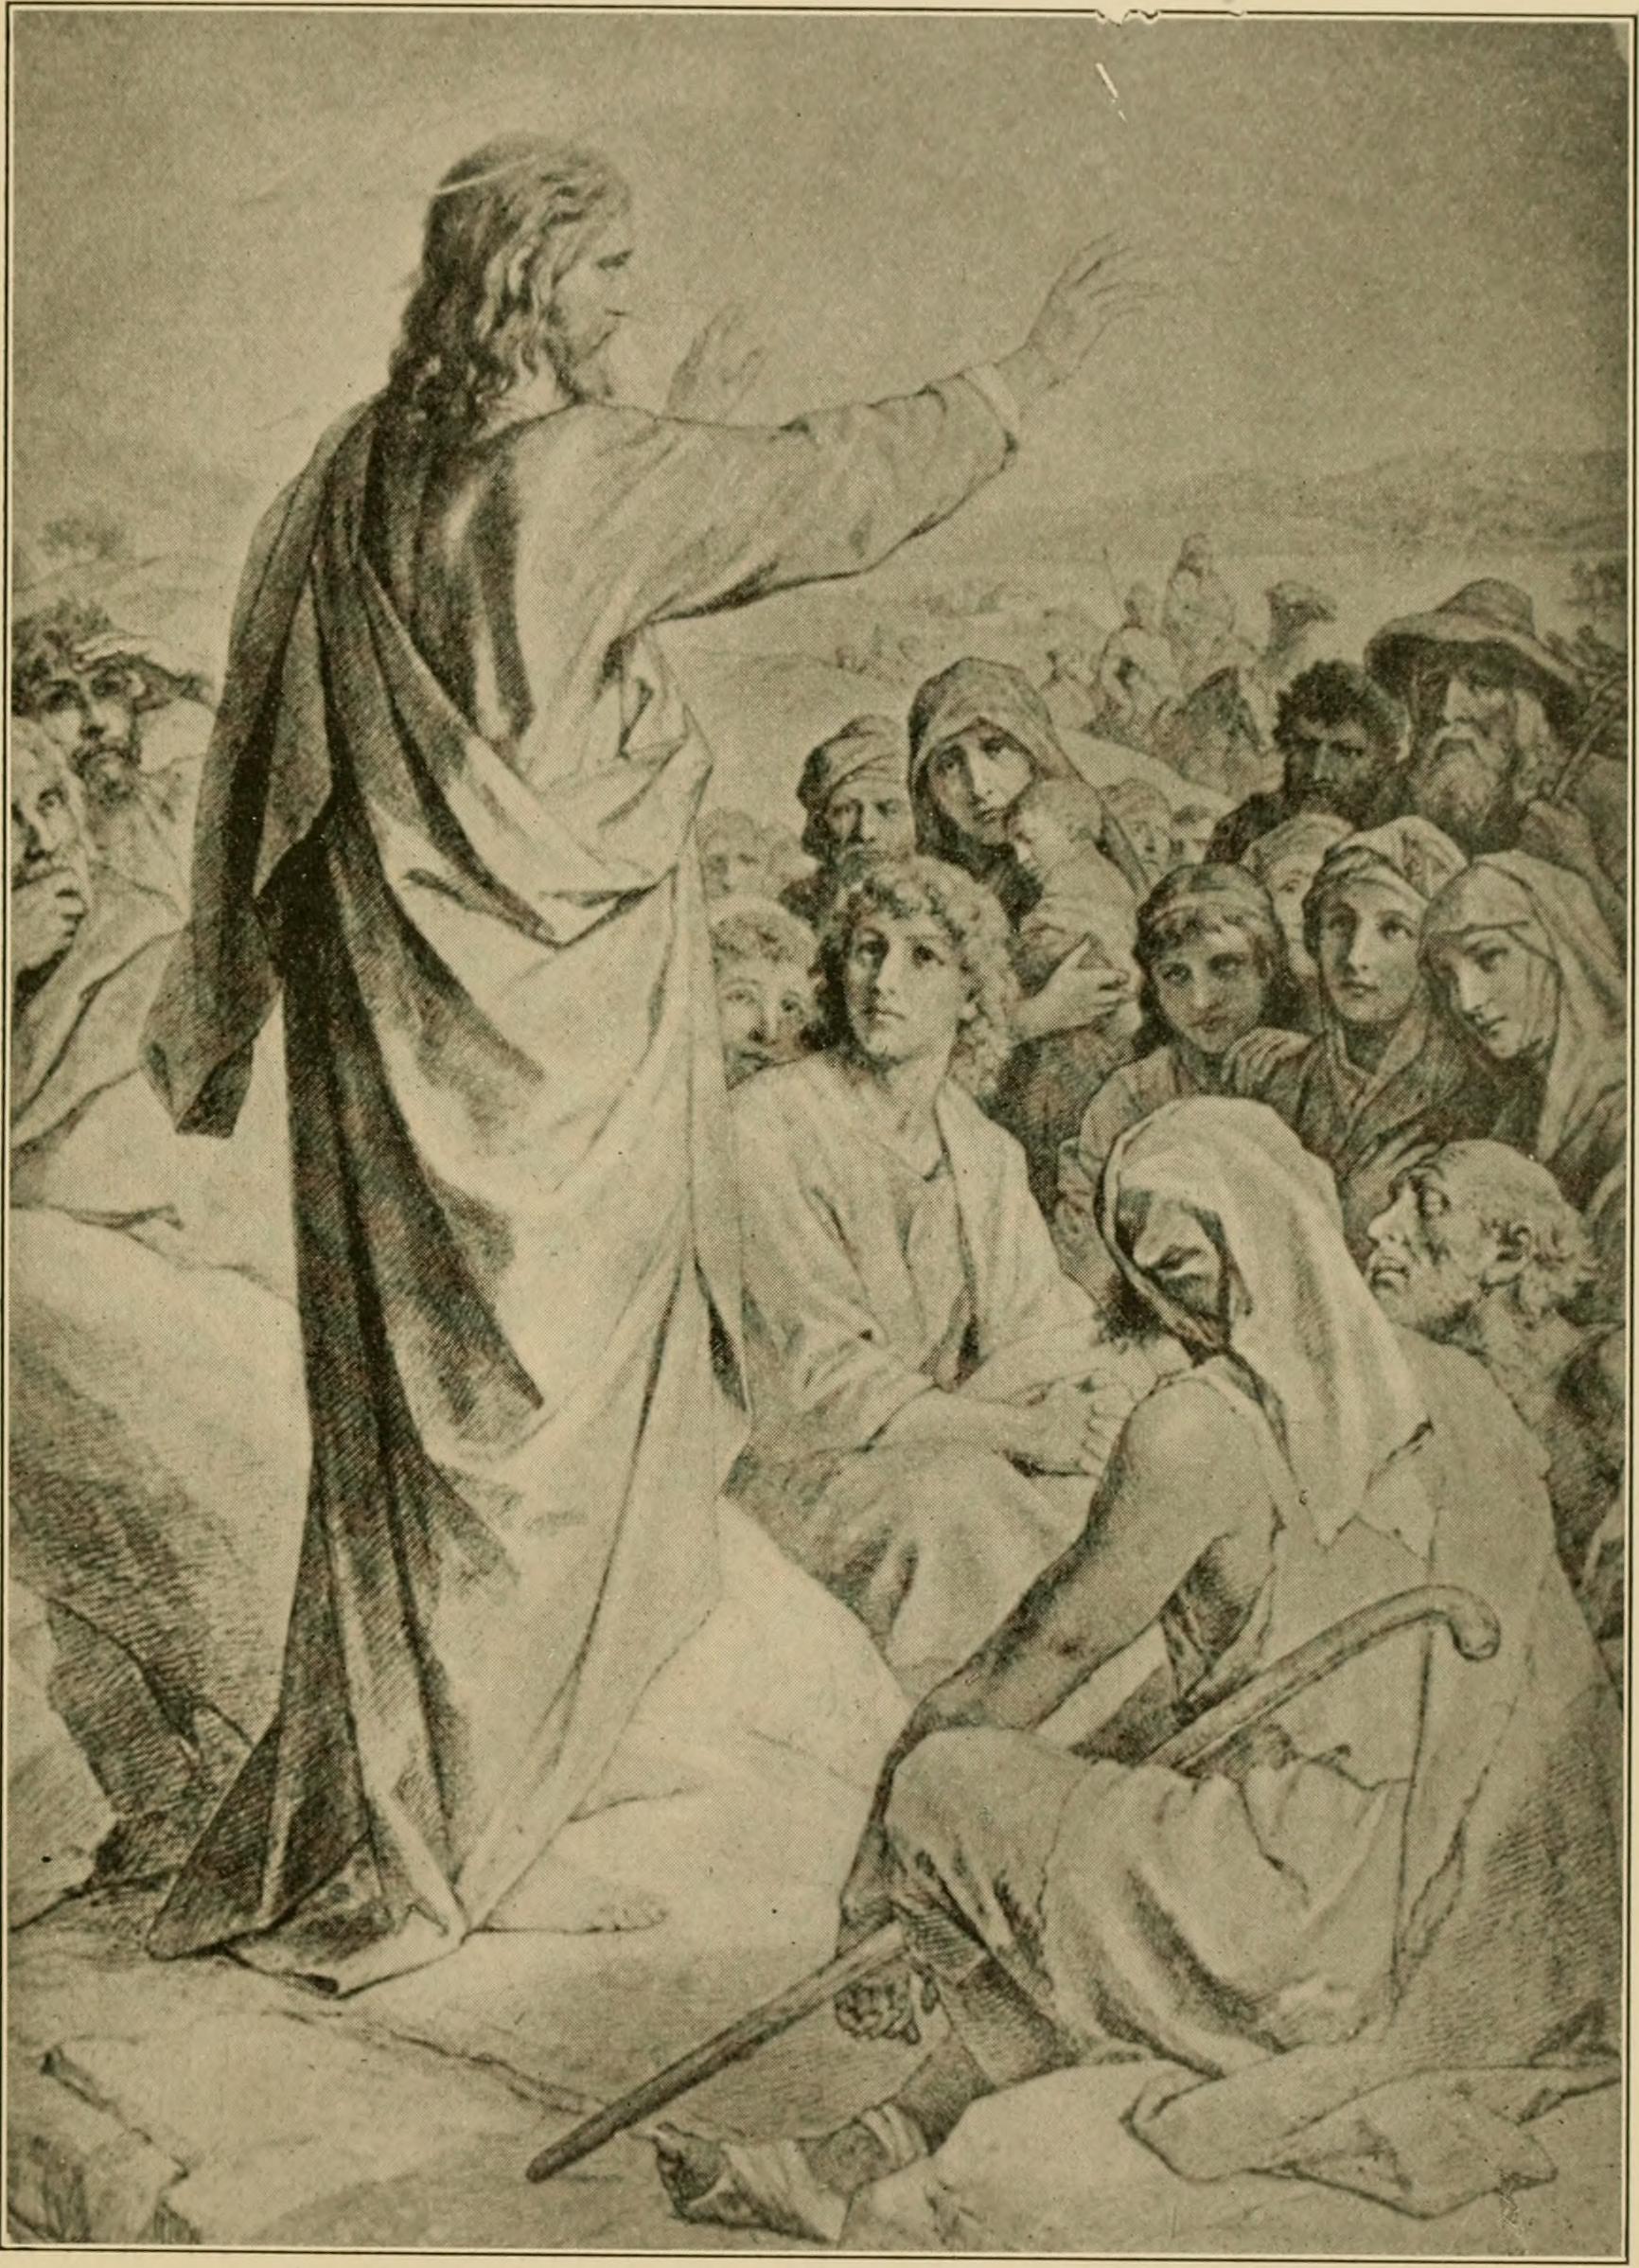 Author: Internet Archive Book Images Author URL: https://www.flickr.com/people/internetarchivebookimages/ Title: Image from page 52 of "The life on earth of our Blessed Lord : told in rhyme,